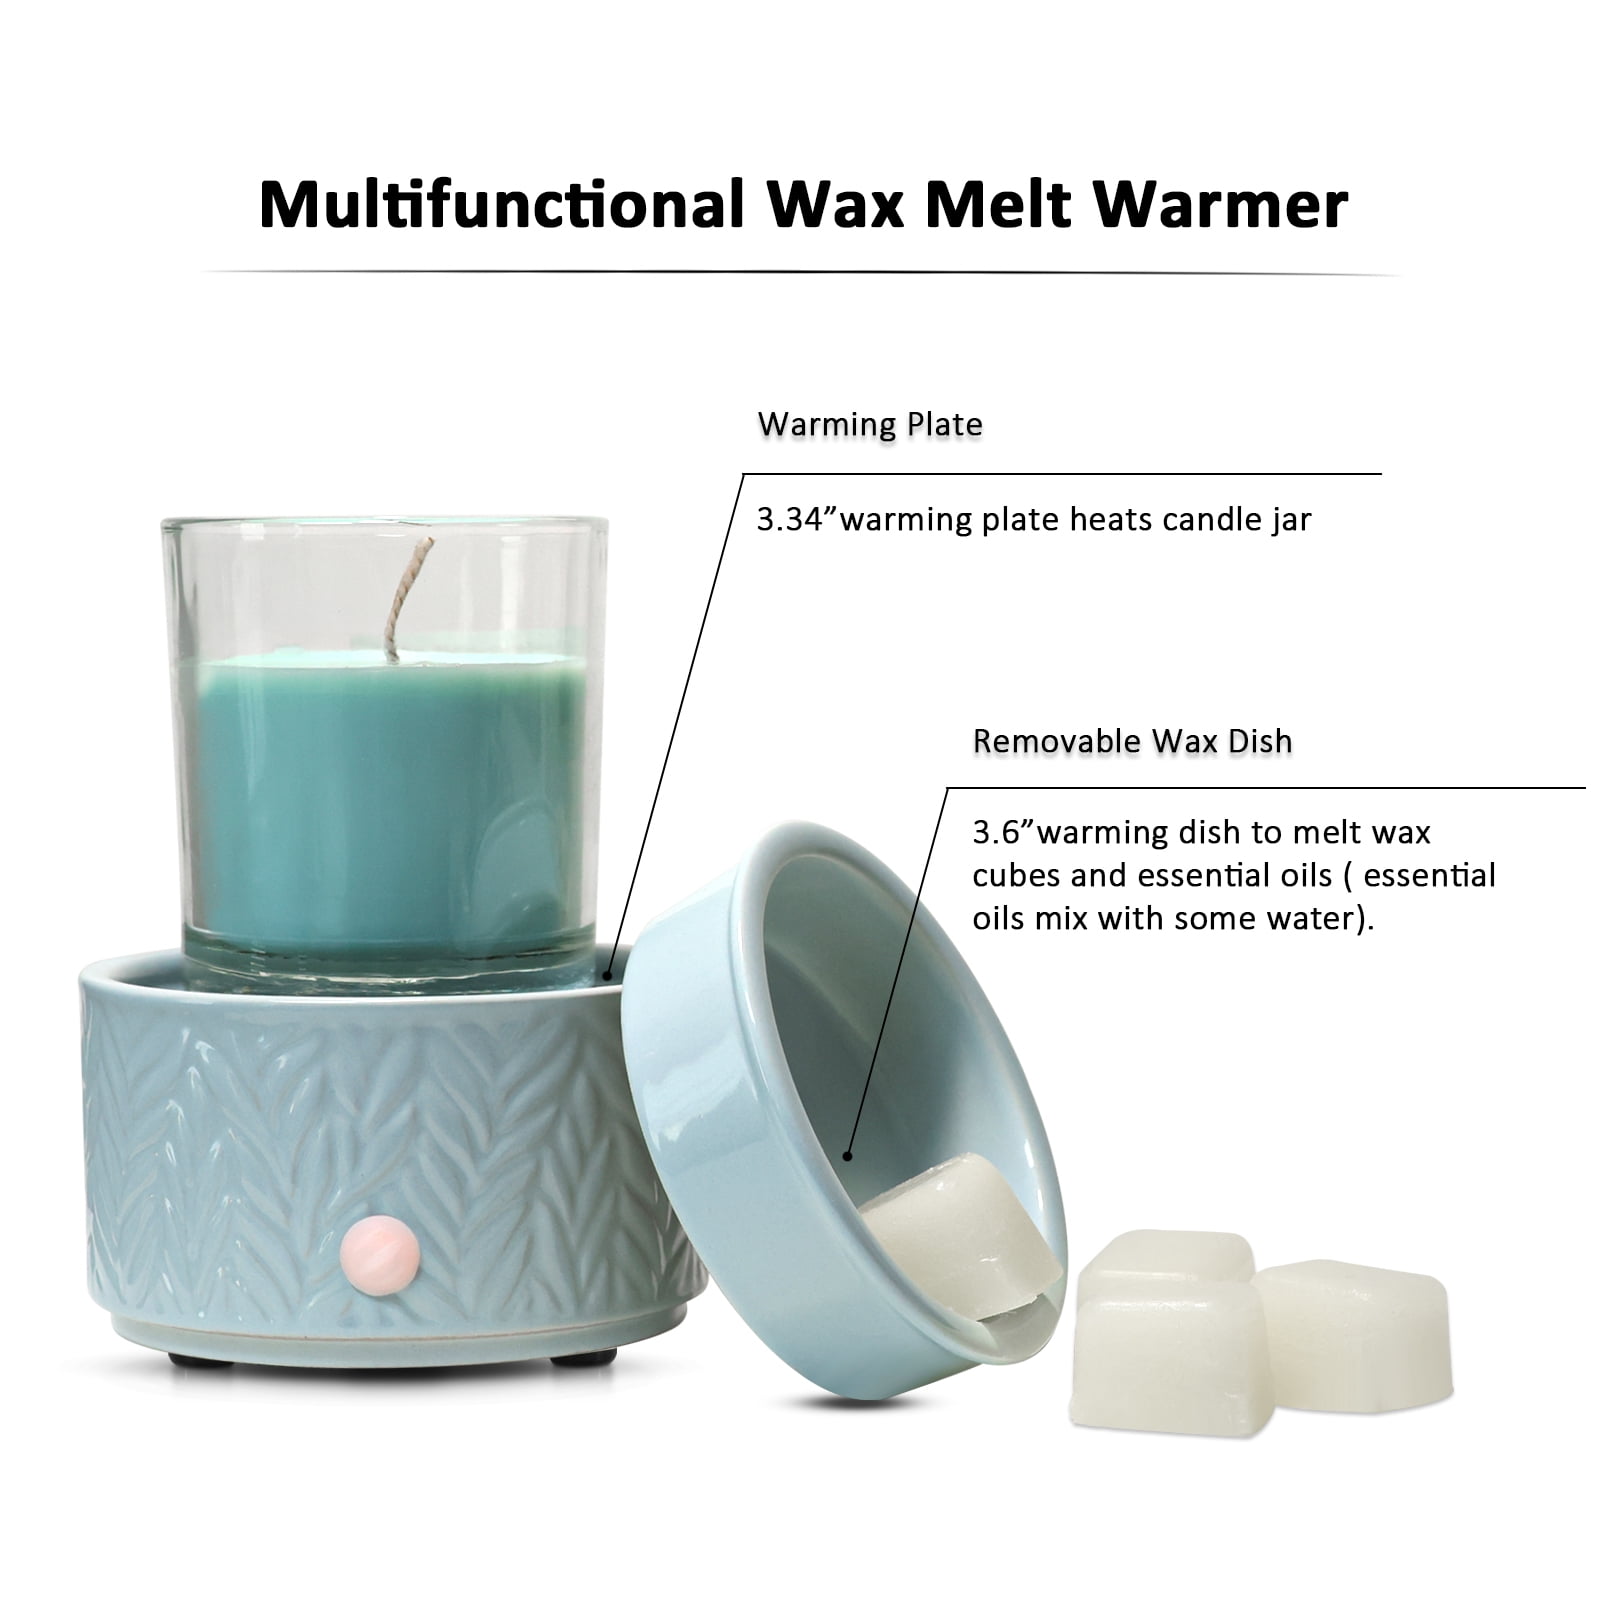 PALANCHY Wax Melt Warmer Ceramic 3-in-1 Oil Burner Electric Candle Wax Warmer Burner Melter Fragrance Warmer for Scented Waxs Home Office Bedroom